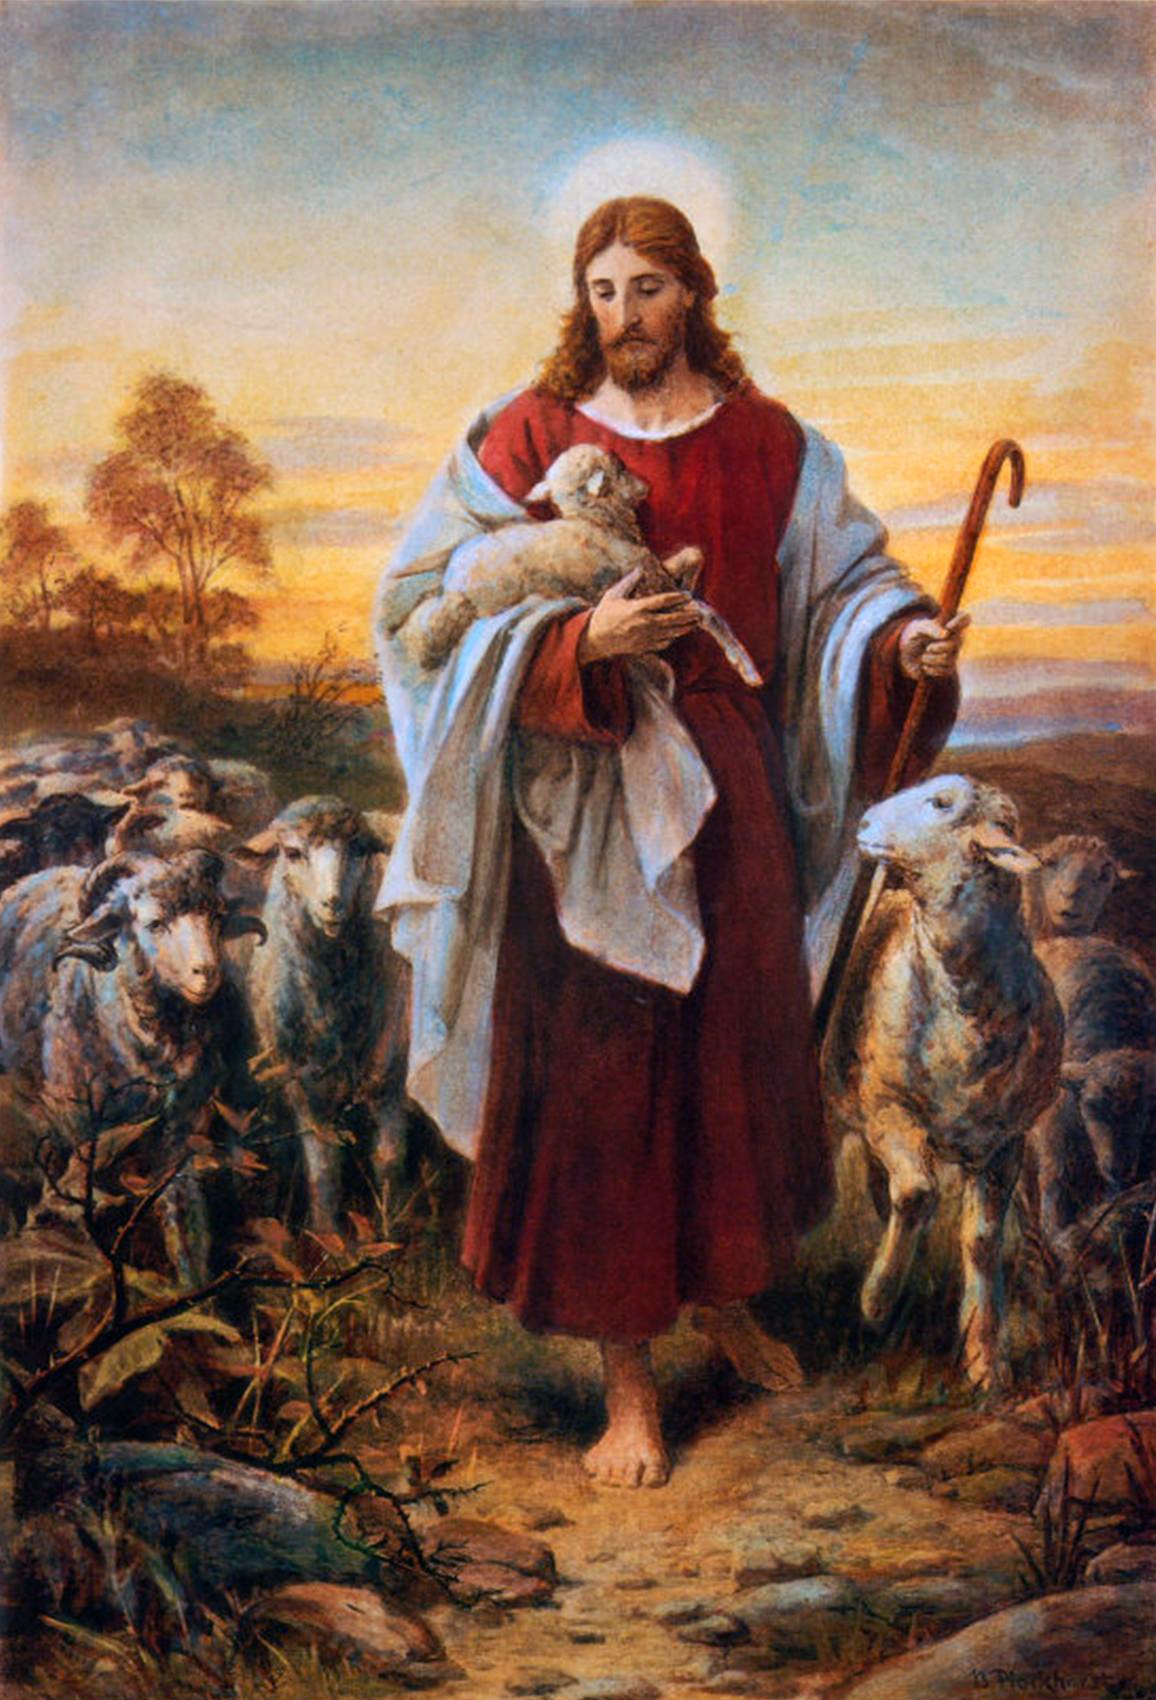 This famous painting, Good Shephard, by Bernhard Plockhorst, depicts the well-known ministry of Messiah Yeshua seeking the "lost sheep".  Until recently, it was seldom understood that this aspect of His ministry was the beginning of the prophesied restoration of all Israel, including the Lost Tribes of the House of Ephraim.